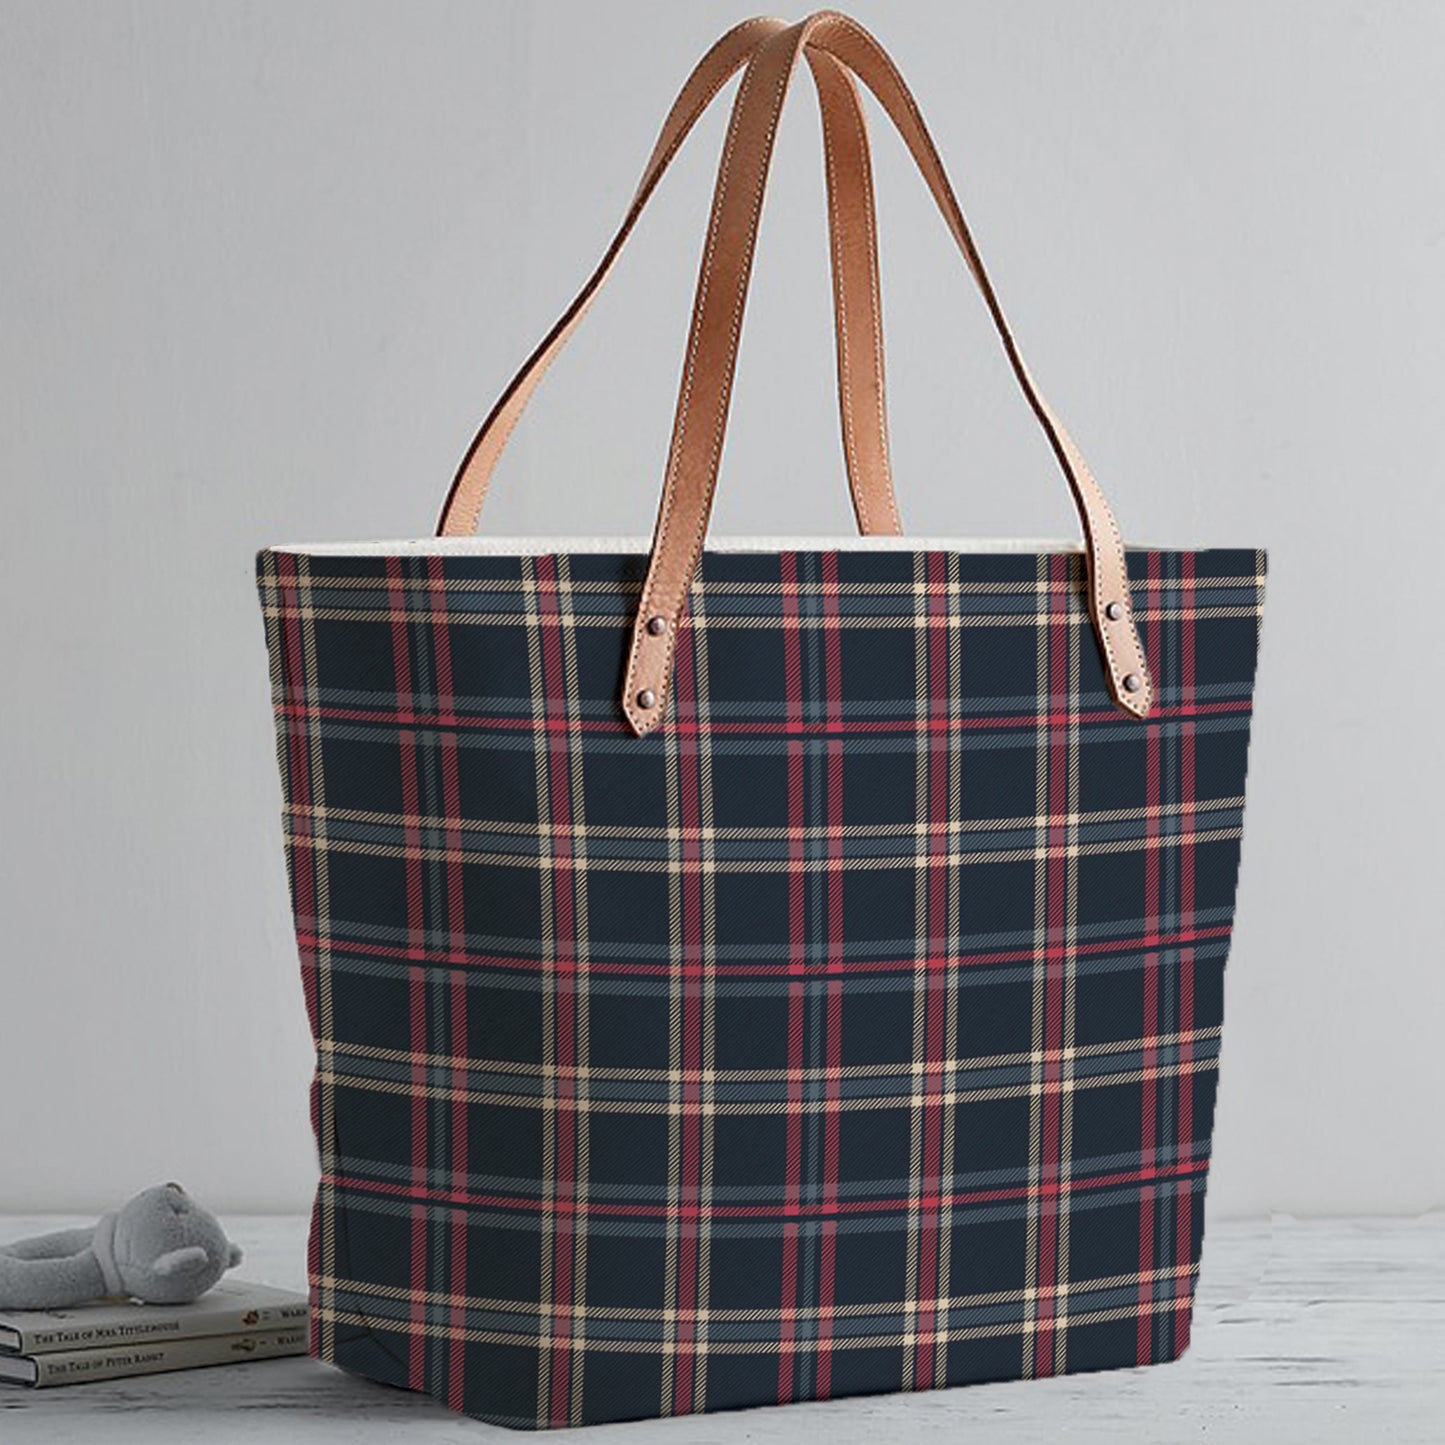 Stylish navy blue and red plaid tote bag, perfect for carrying essentials in style.